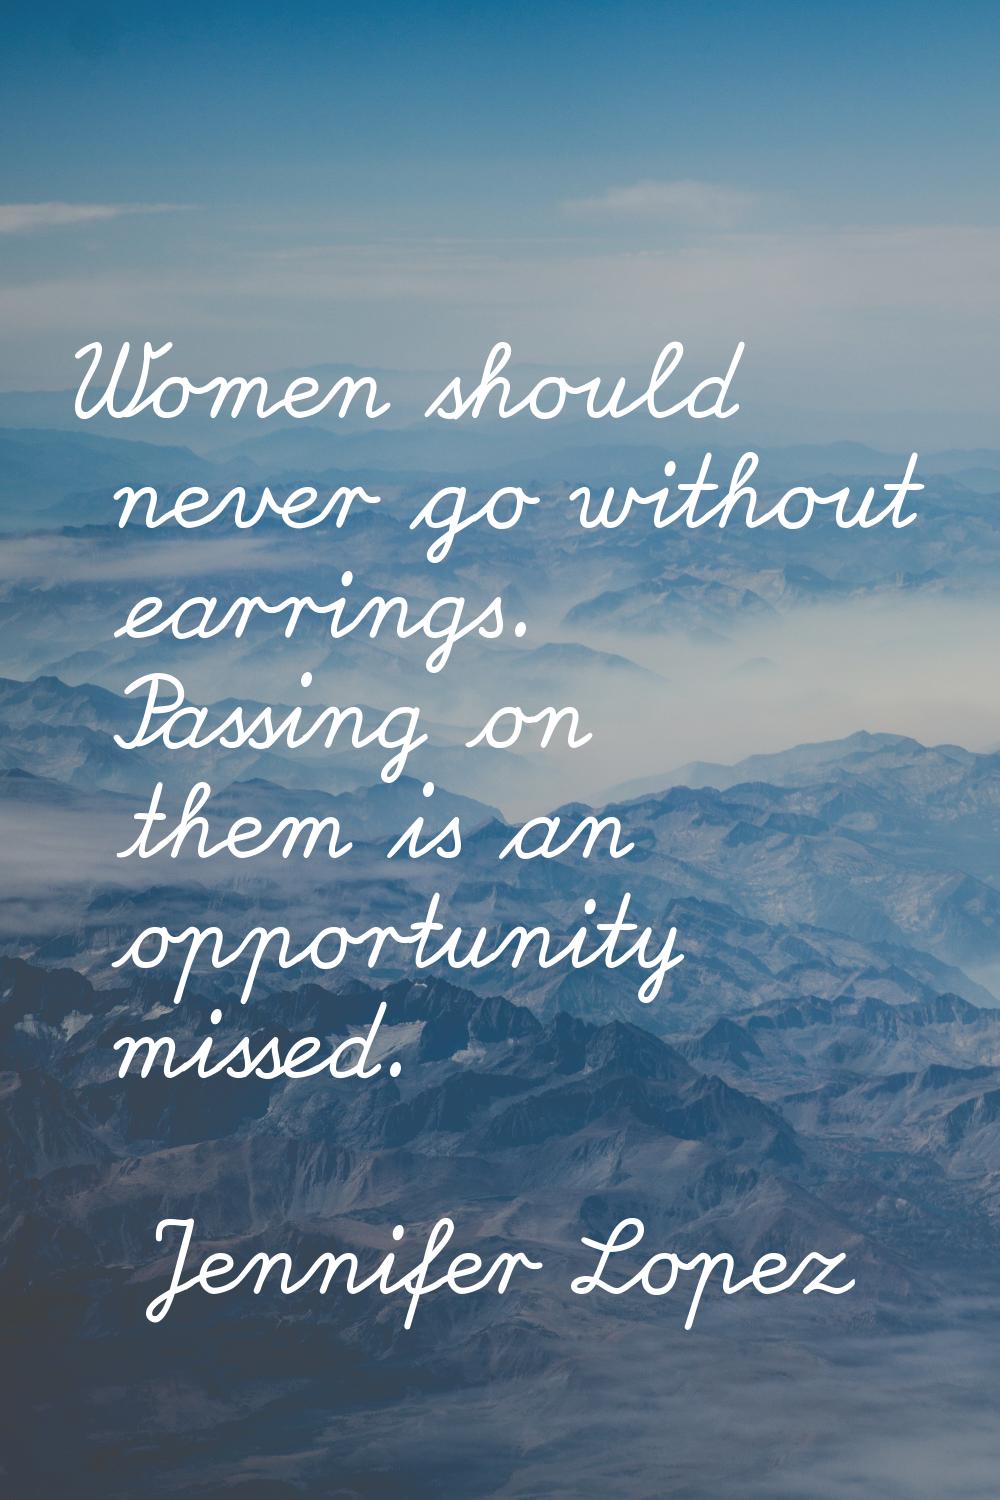 Women should never go without earrings. Passing on them is an opportunity missed.